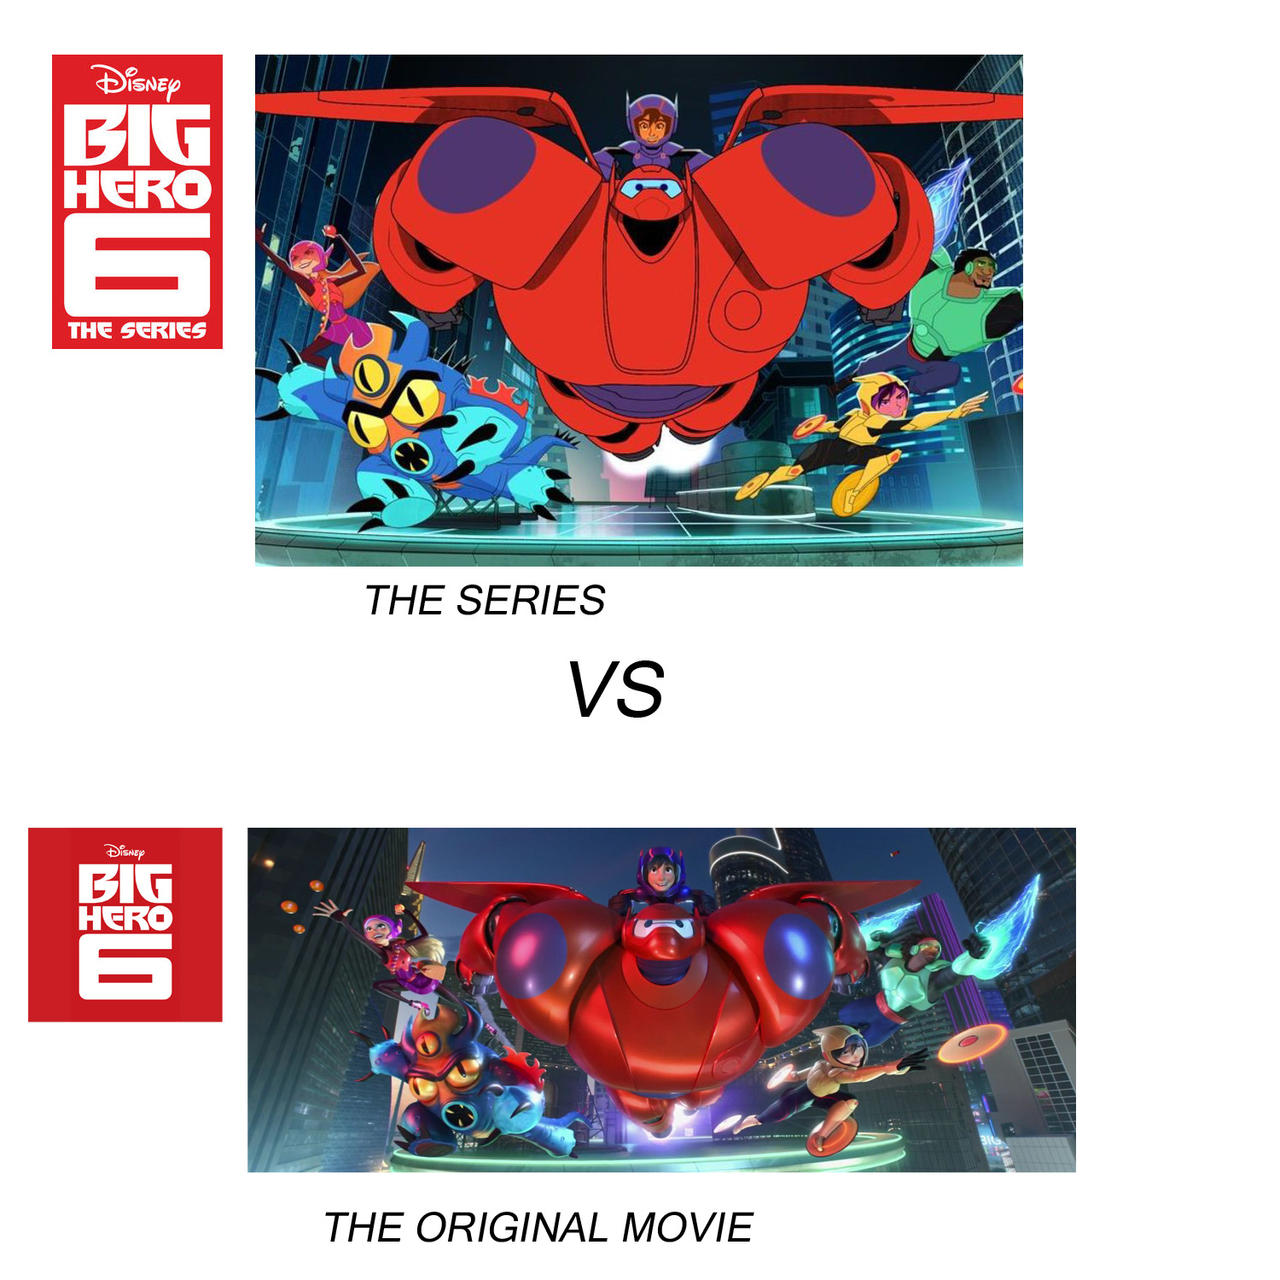 Big Hero 6 The Movie Vs The Series by andyrey38 on DeviantArt